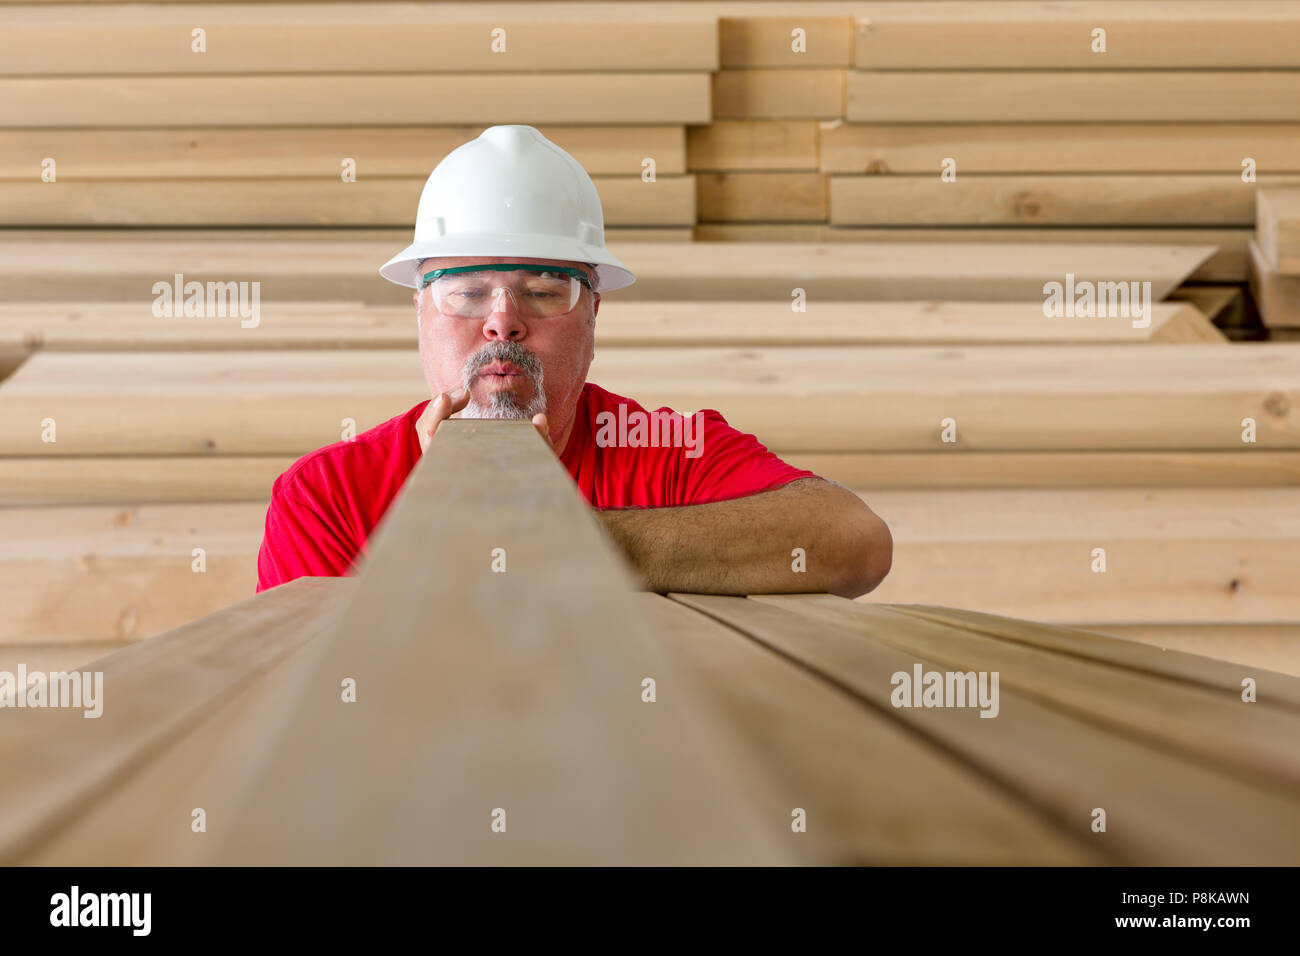 Man with helmet and protective eyewear taking wooden construction plank Stock Photo